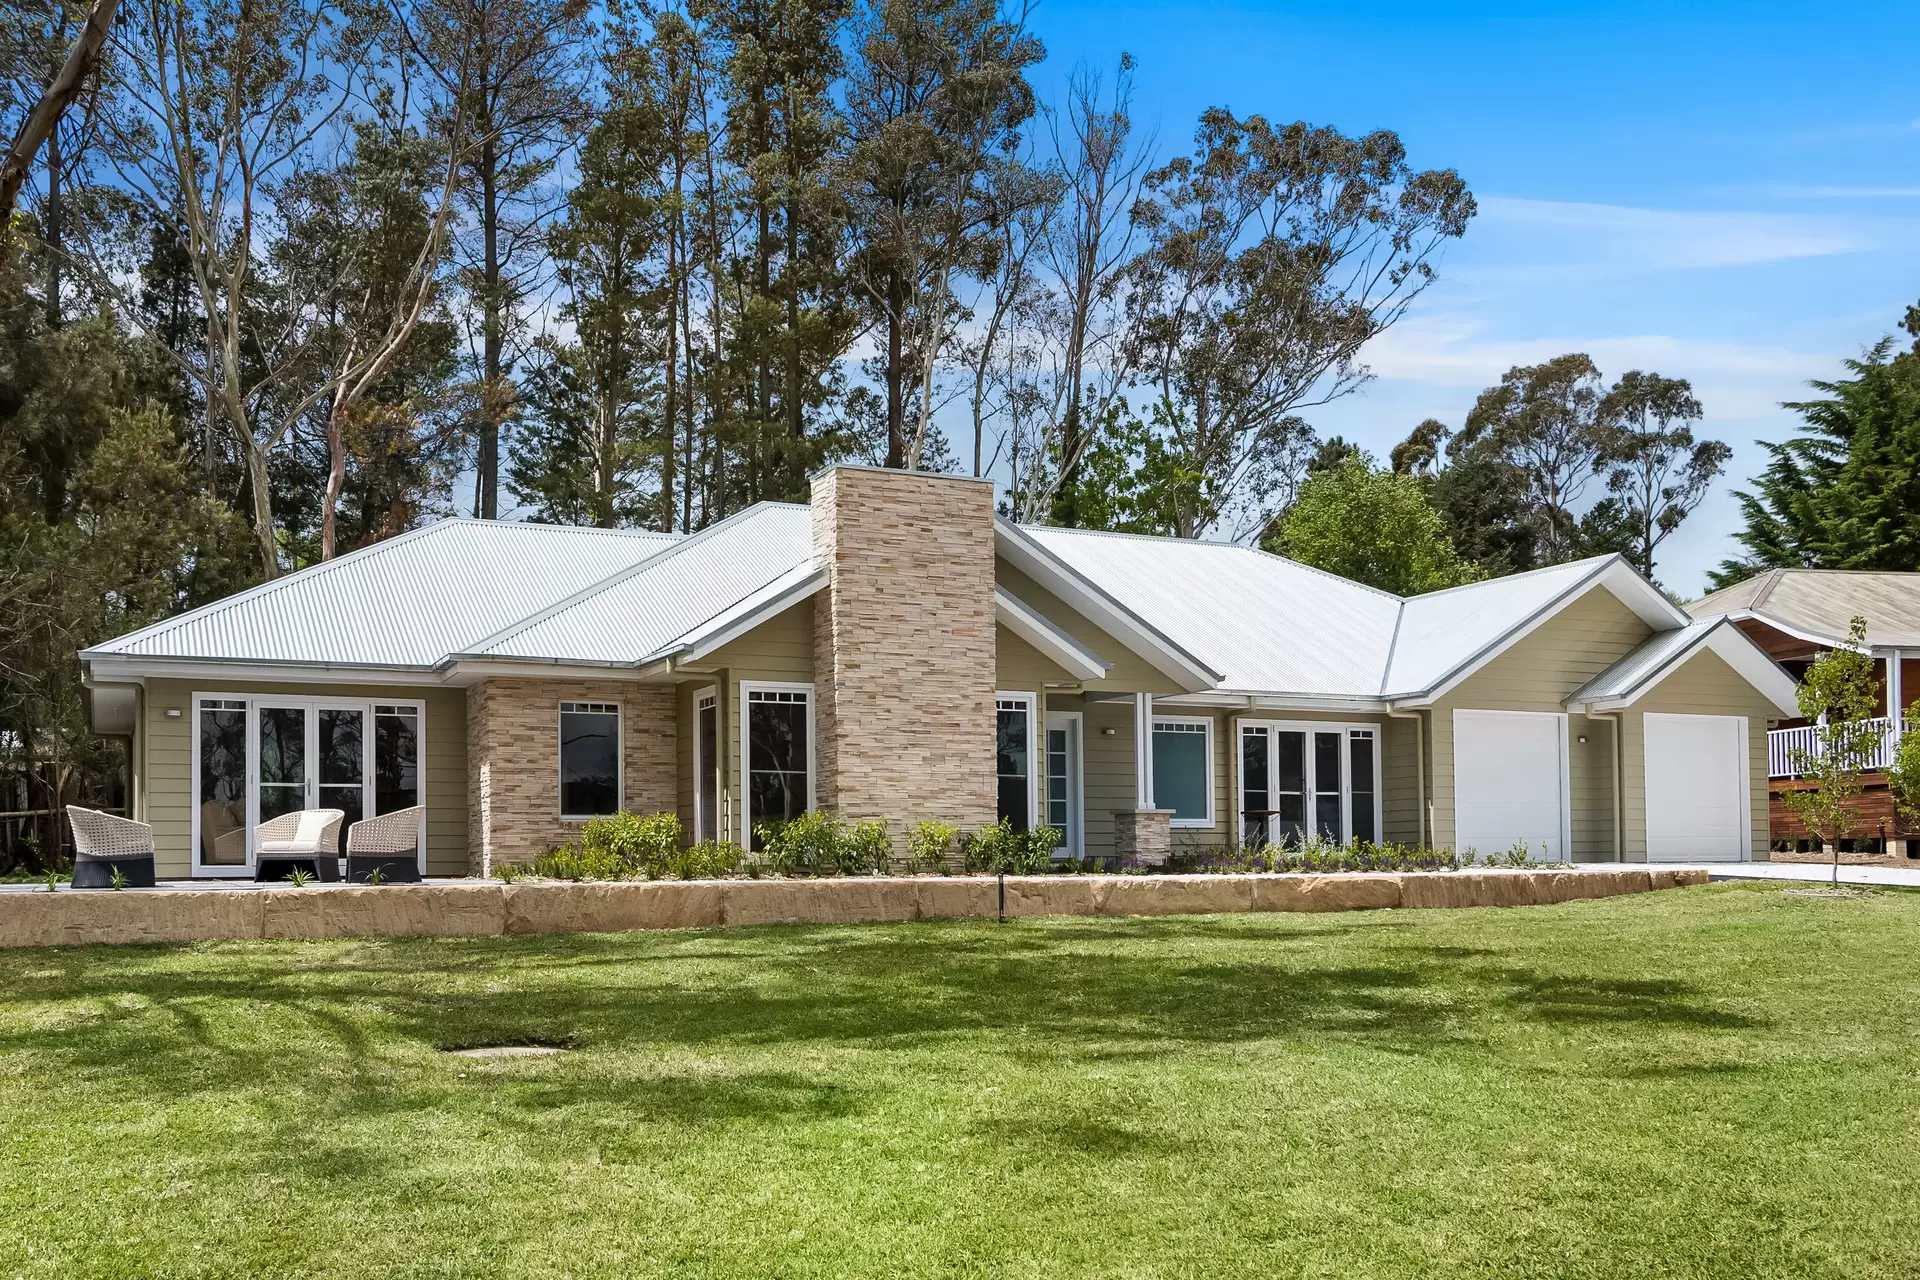 Photo #15: 4 Fountain Street, Berrima - Sold by Drew Lindsay Sotheby's International Realty